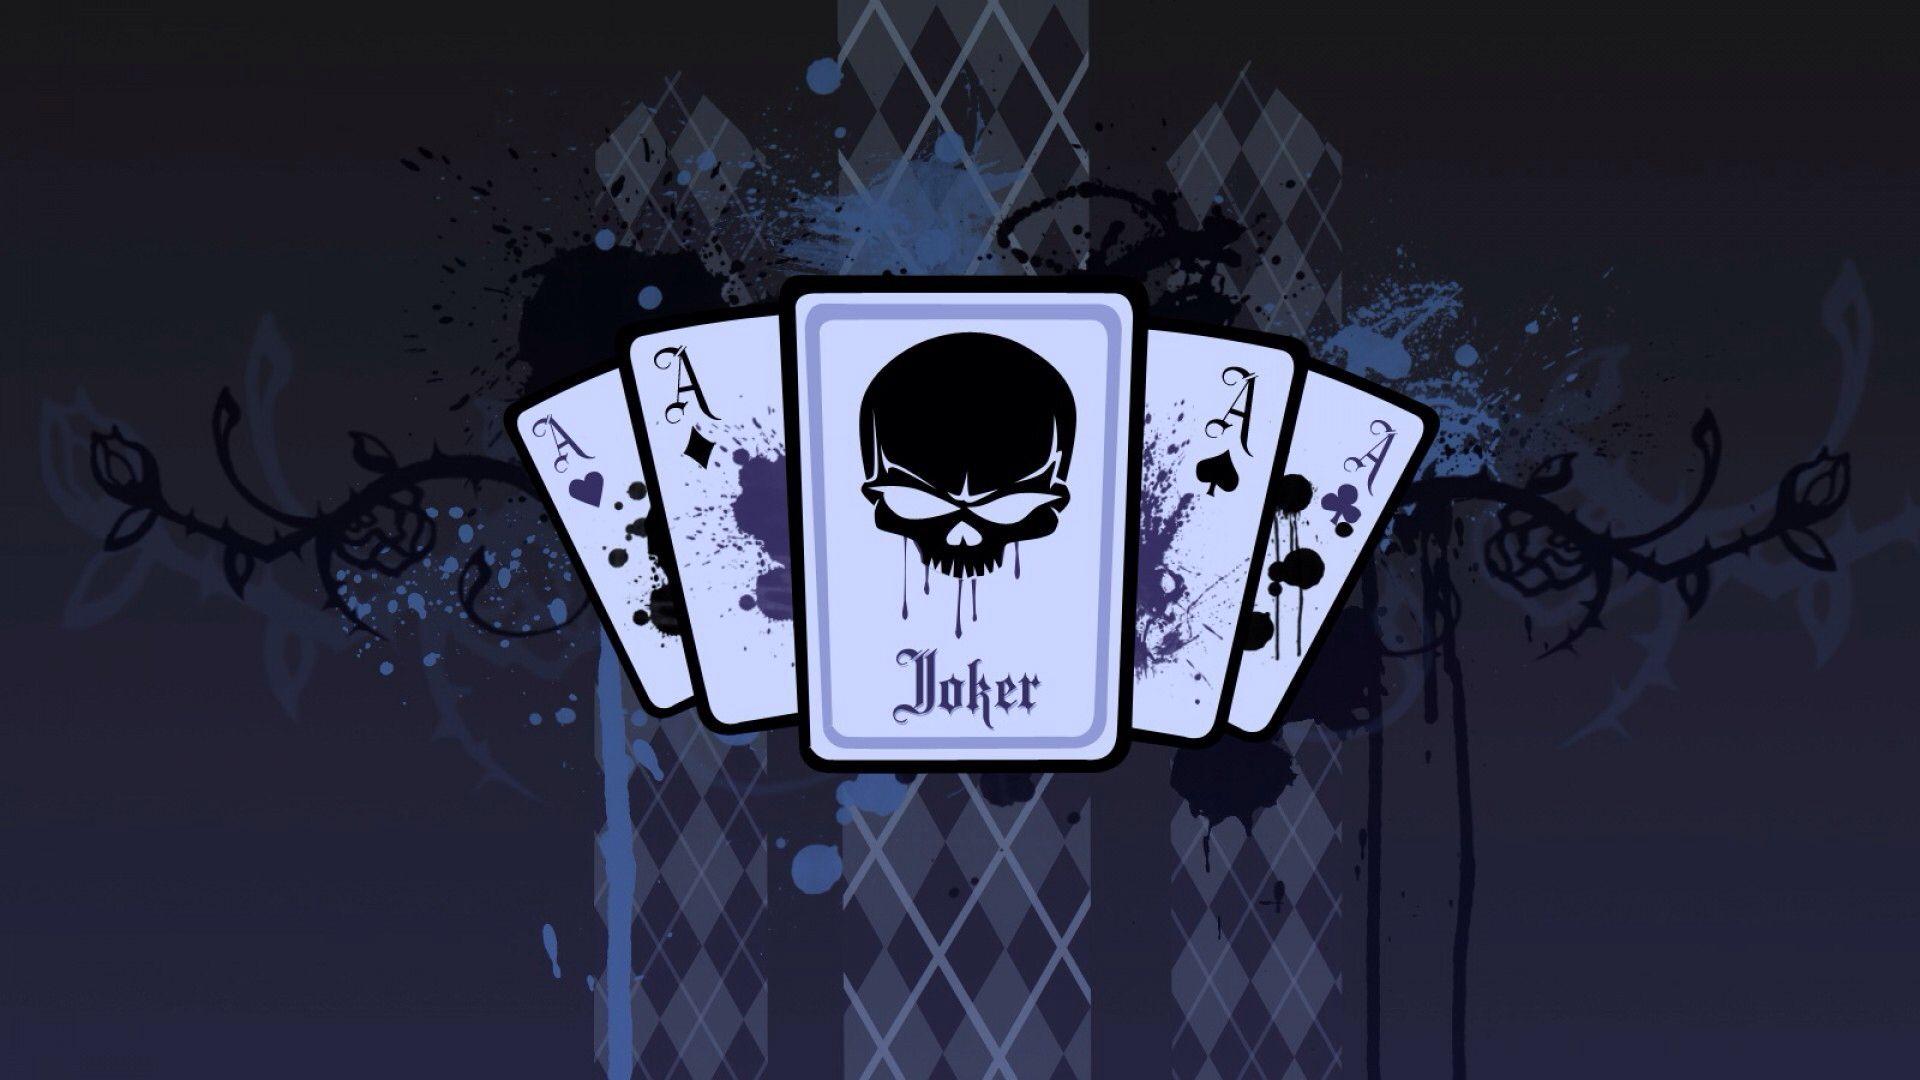 Players Only. Joker playing card